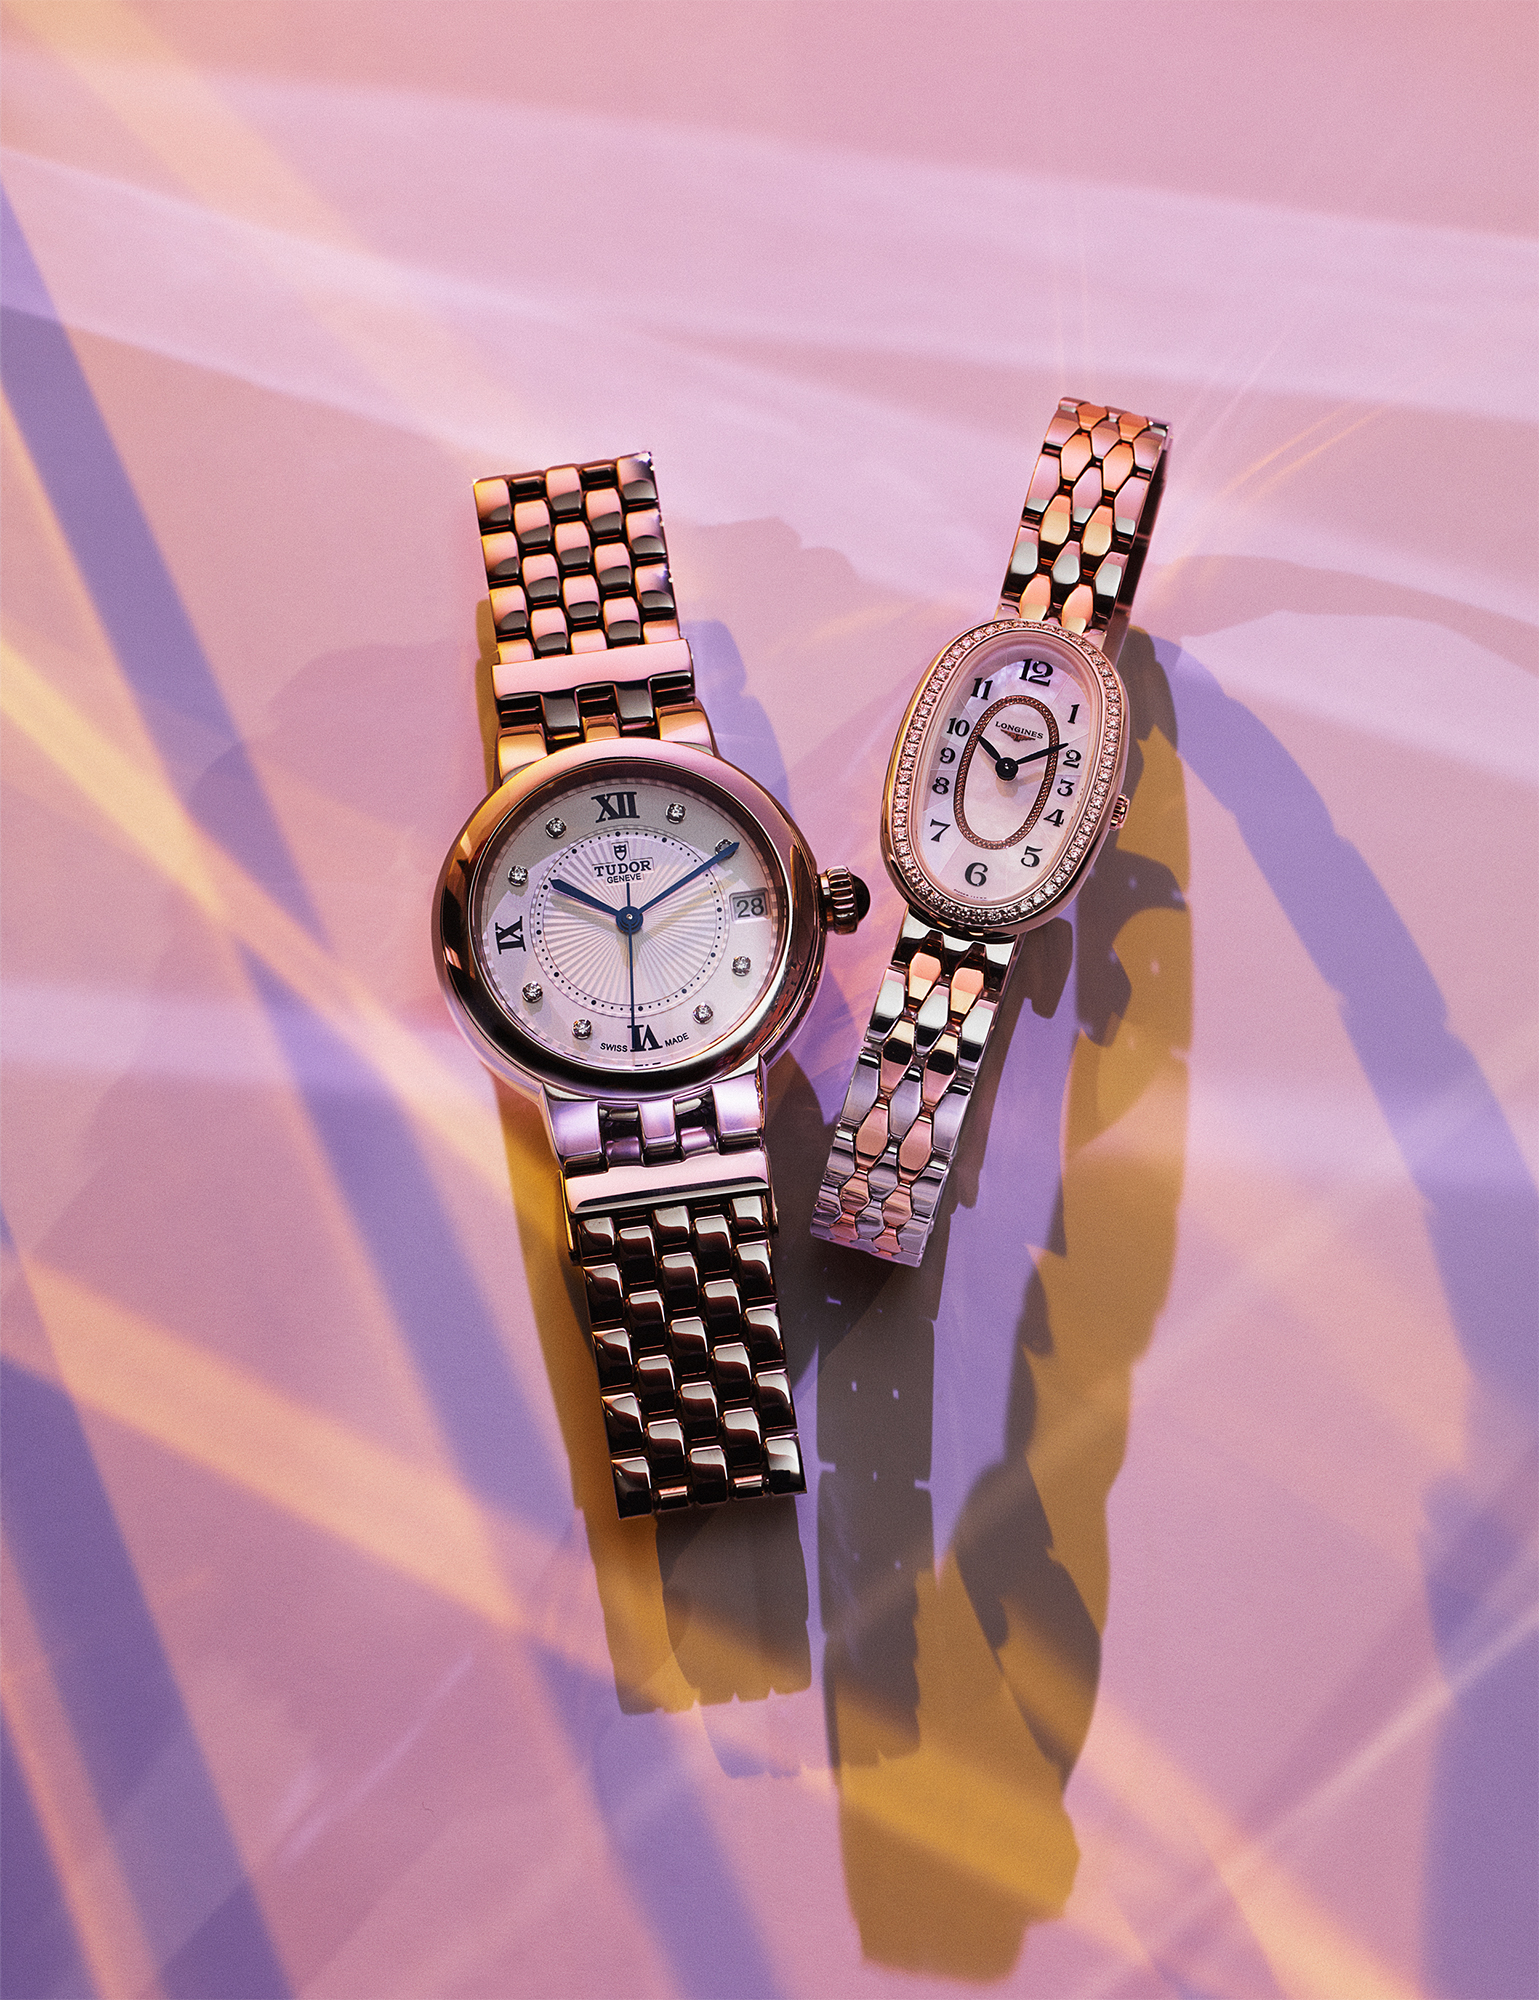 Clair de Rose 34mm in stainless steel with opaline dial with 8 diamonds, £2,740, TUDOR; Symphonette in diamond-set stainless steel with 18ct rose gold crown, £2,800, LONGINES